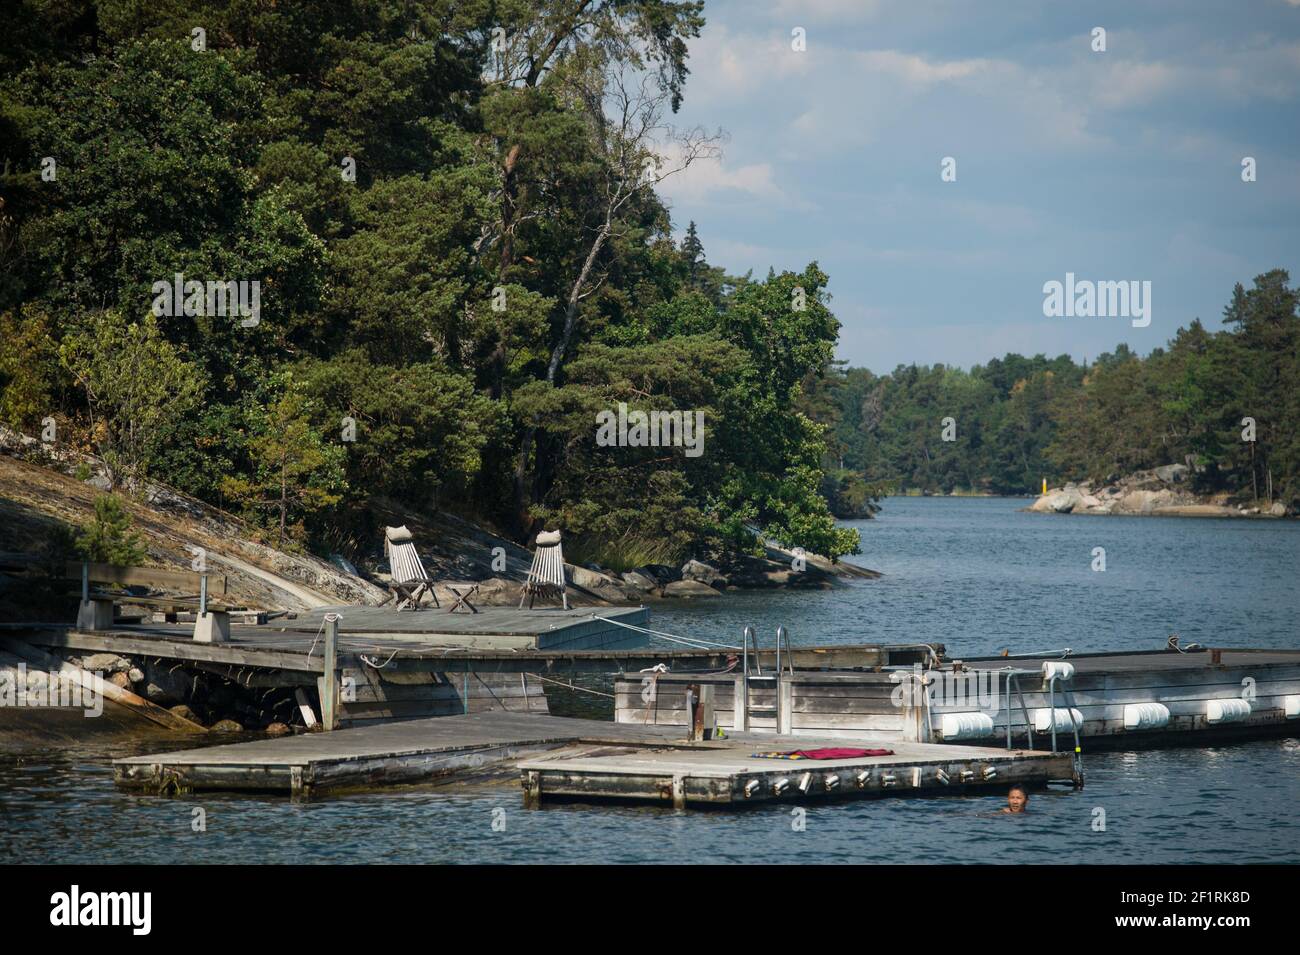 Jetties off an island in the Stockholm Archipelago, Sweden. Stock Photo